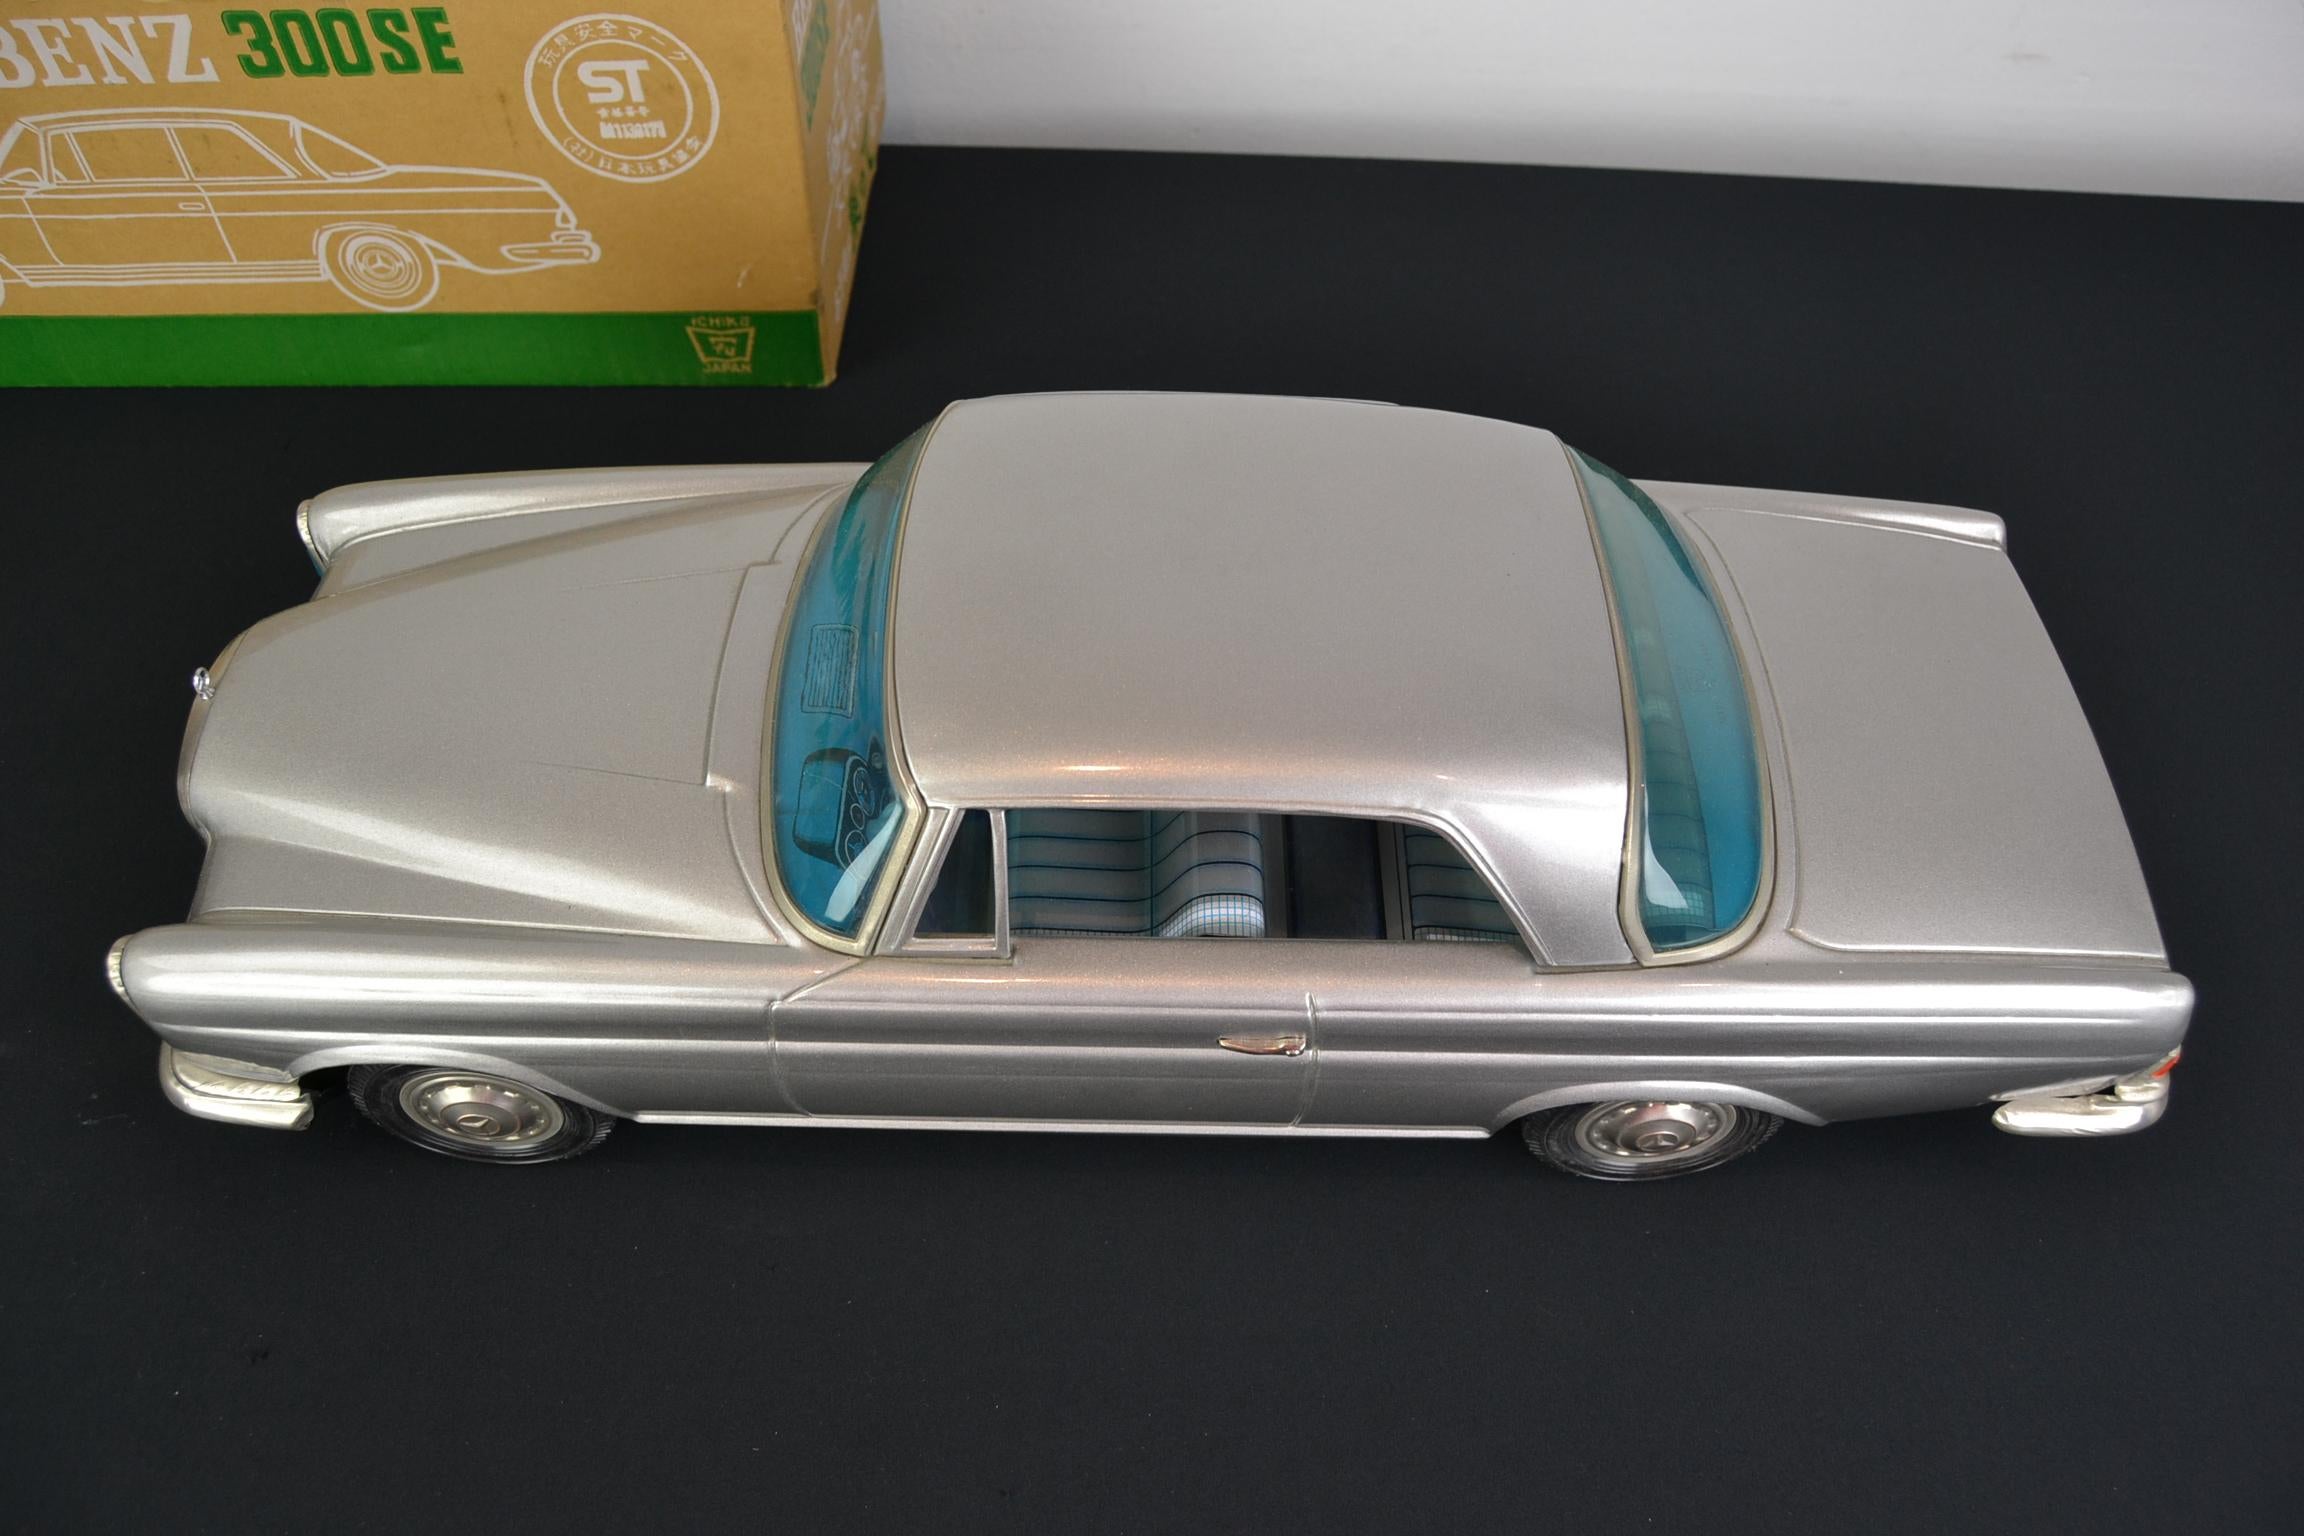 Boxed Mercedes Benz 300 SE Toy Model by Ichiko Japan, 1980s 3